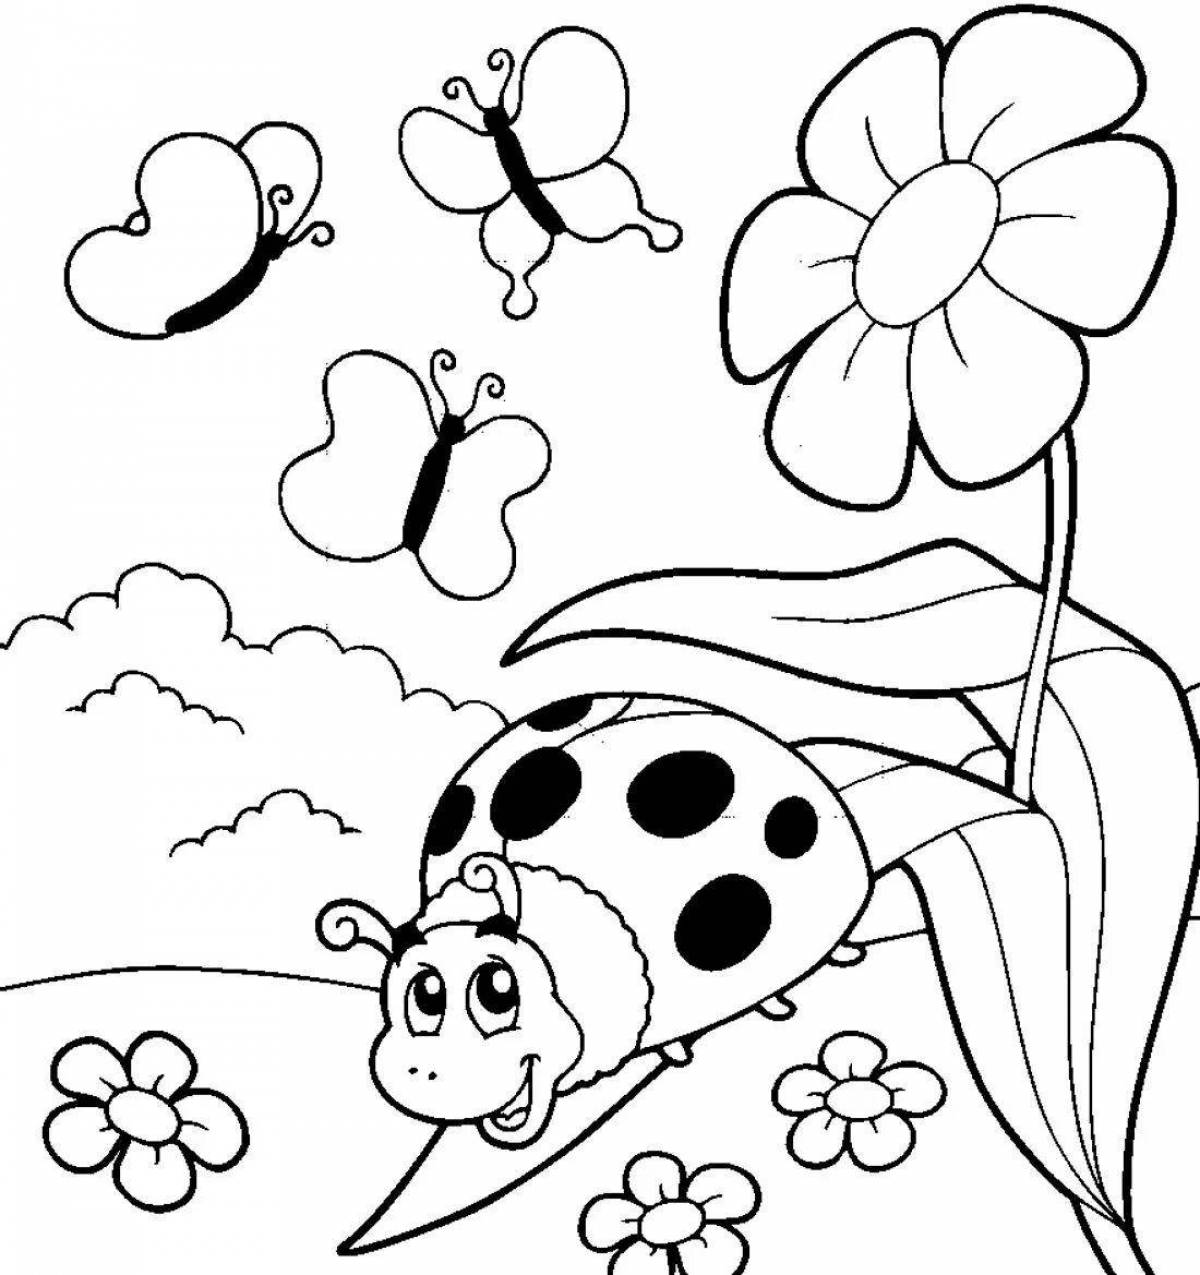 Great ladybug coloring book for kids